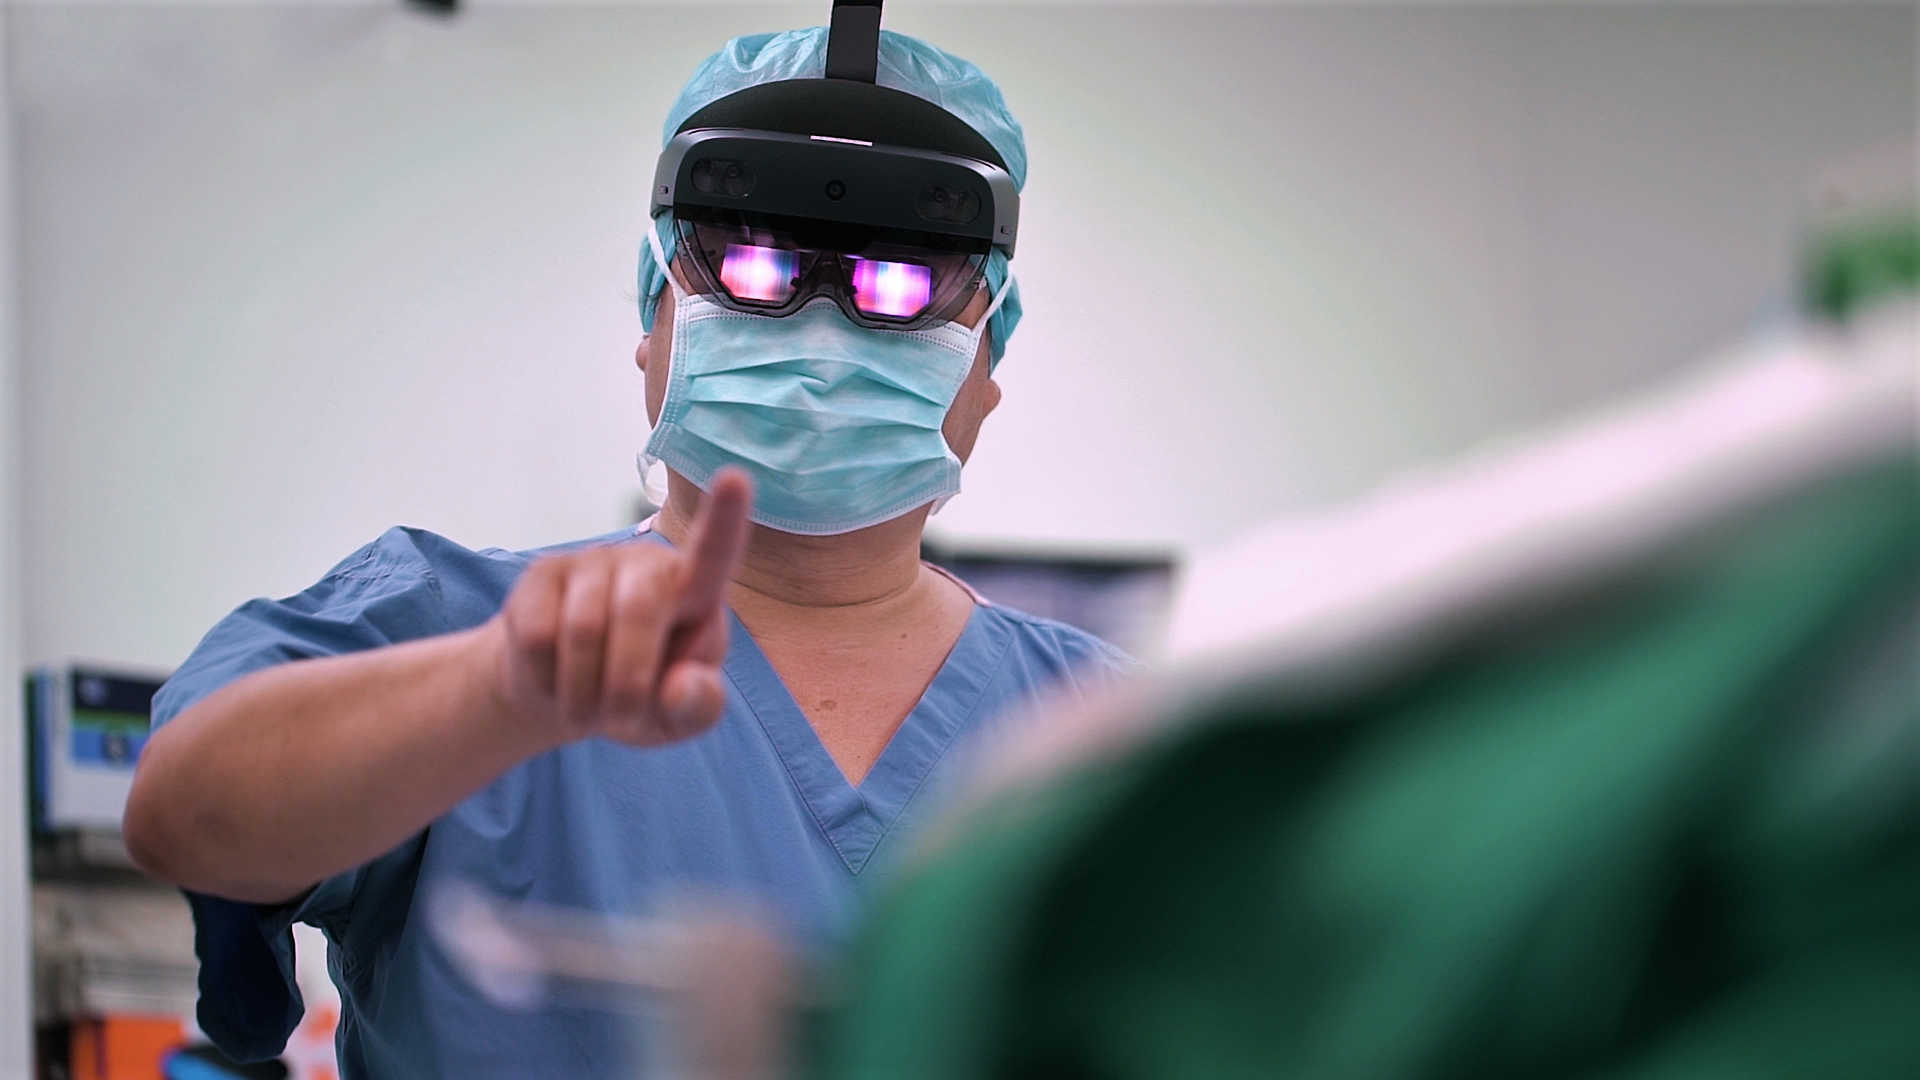 A surgeon wearing a mixed reality headset